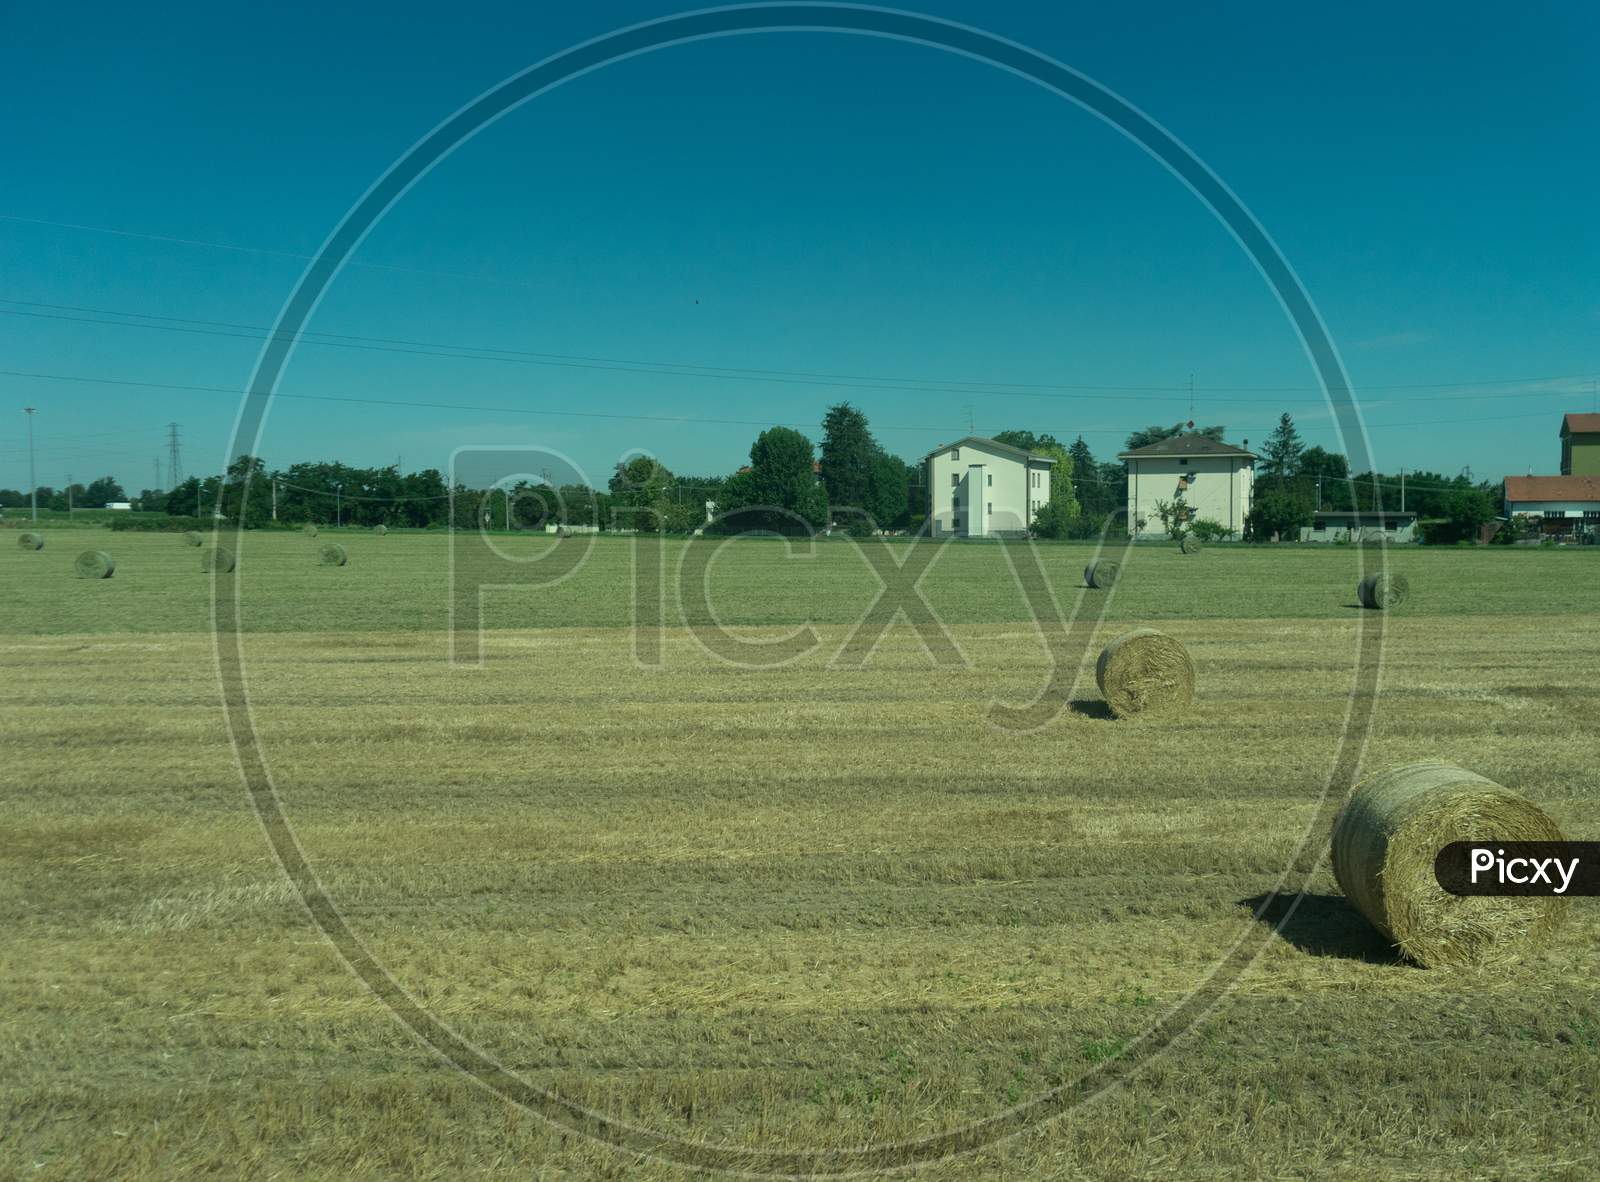 Italy,La Spezia To Kasltelruth Train, A Close Up Of A Dry Grass Field